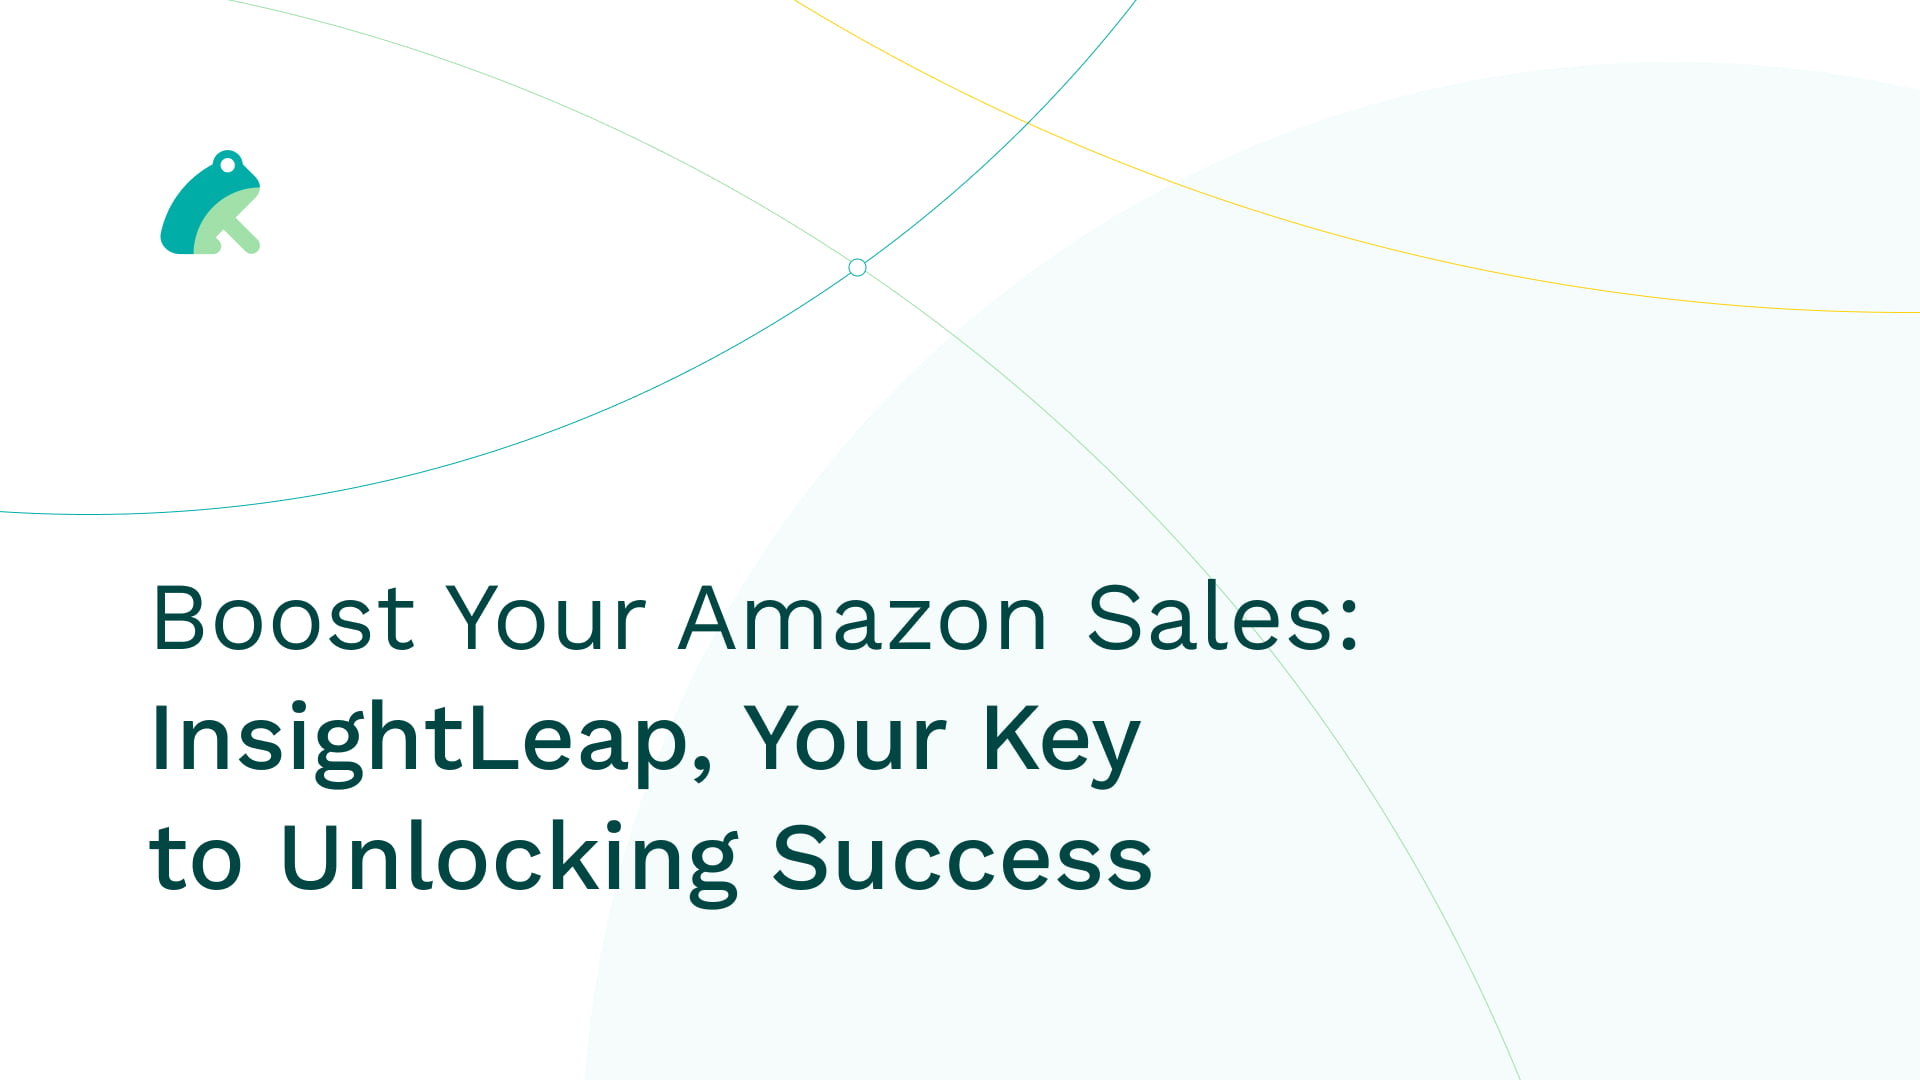 Boost Your Amazon Sales: InsightLeap, Your Key to Unlocking Success